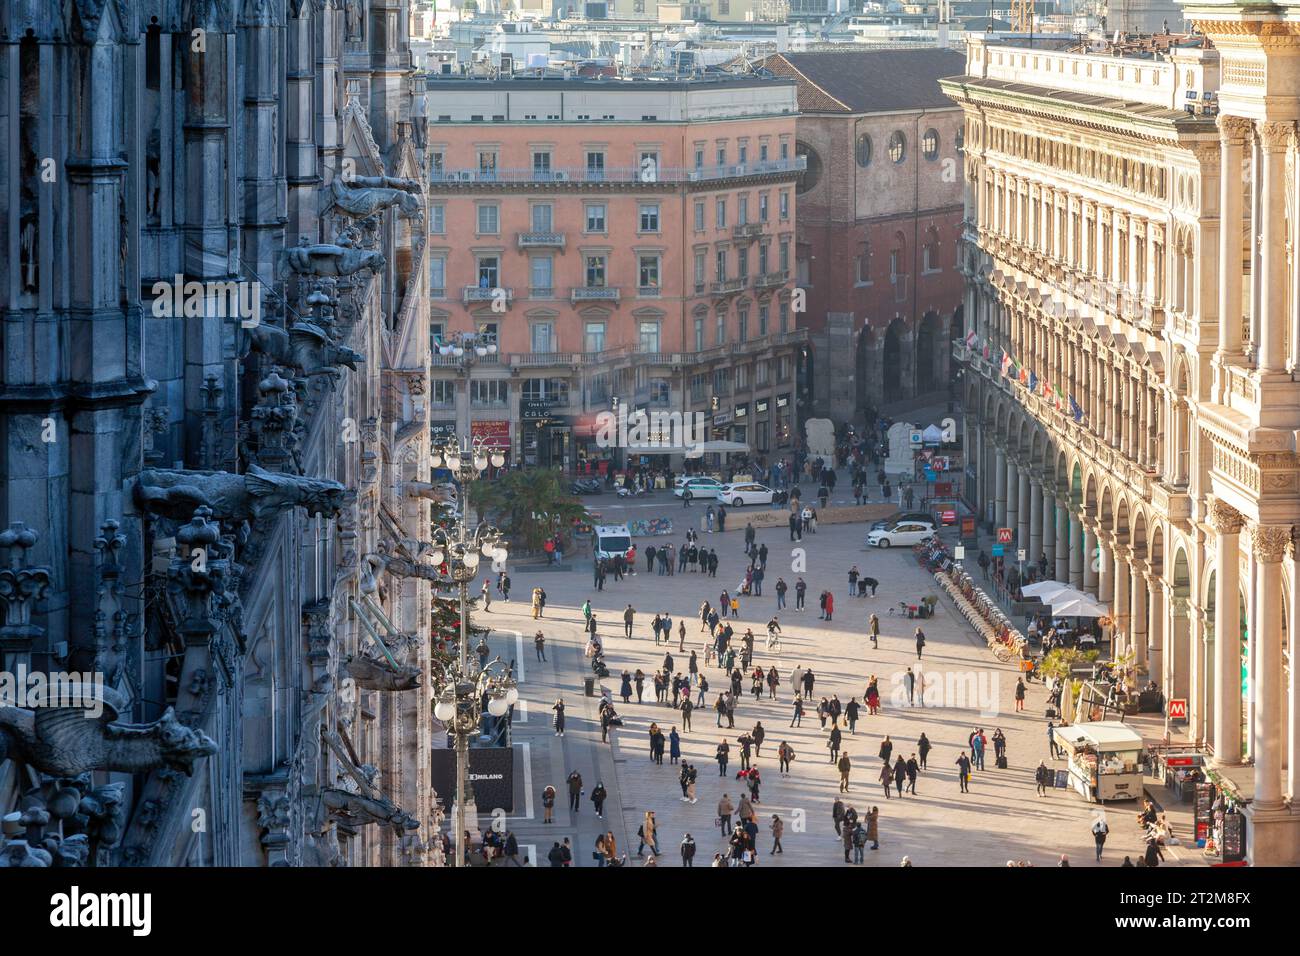 Panoramic view of Piazza del Duomo, as seen from the upper floors of the Duomo, with partial view of the Gallery Vittorio Emanuele Stock Photo